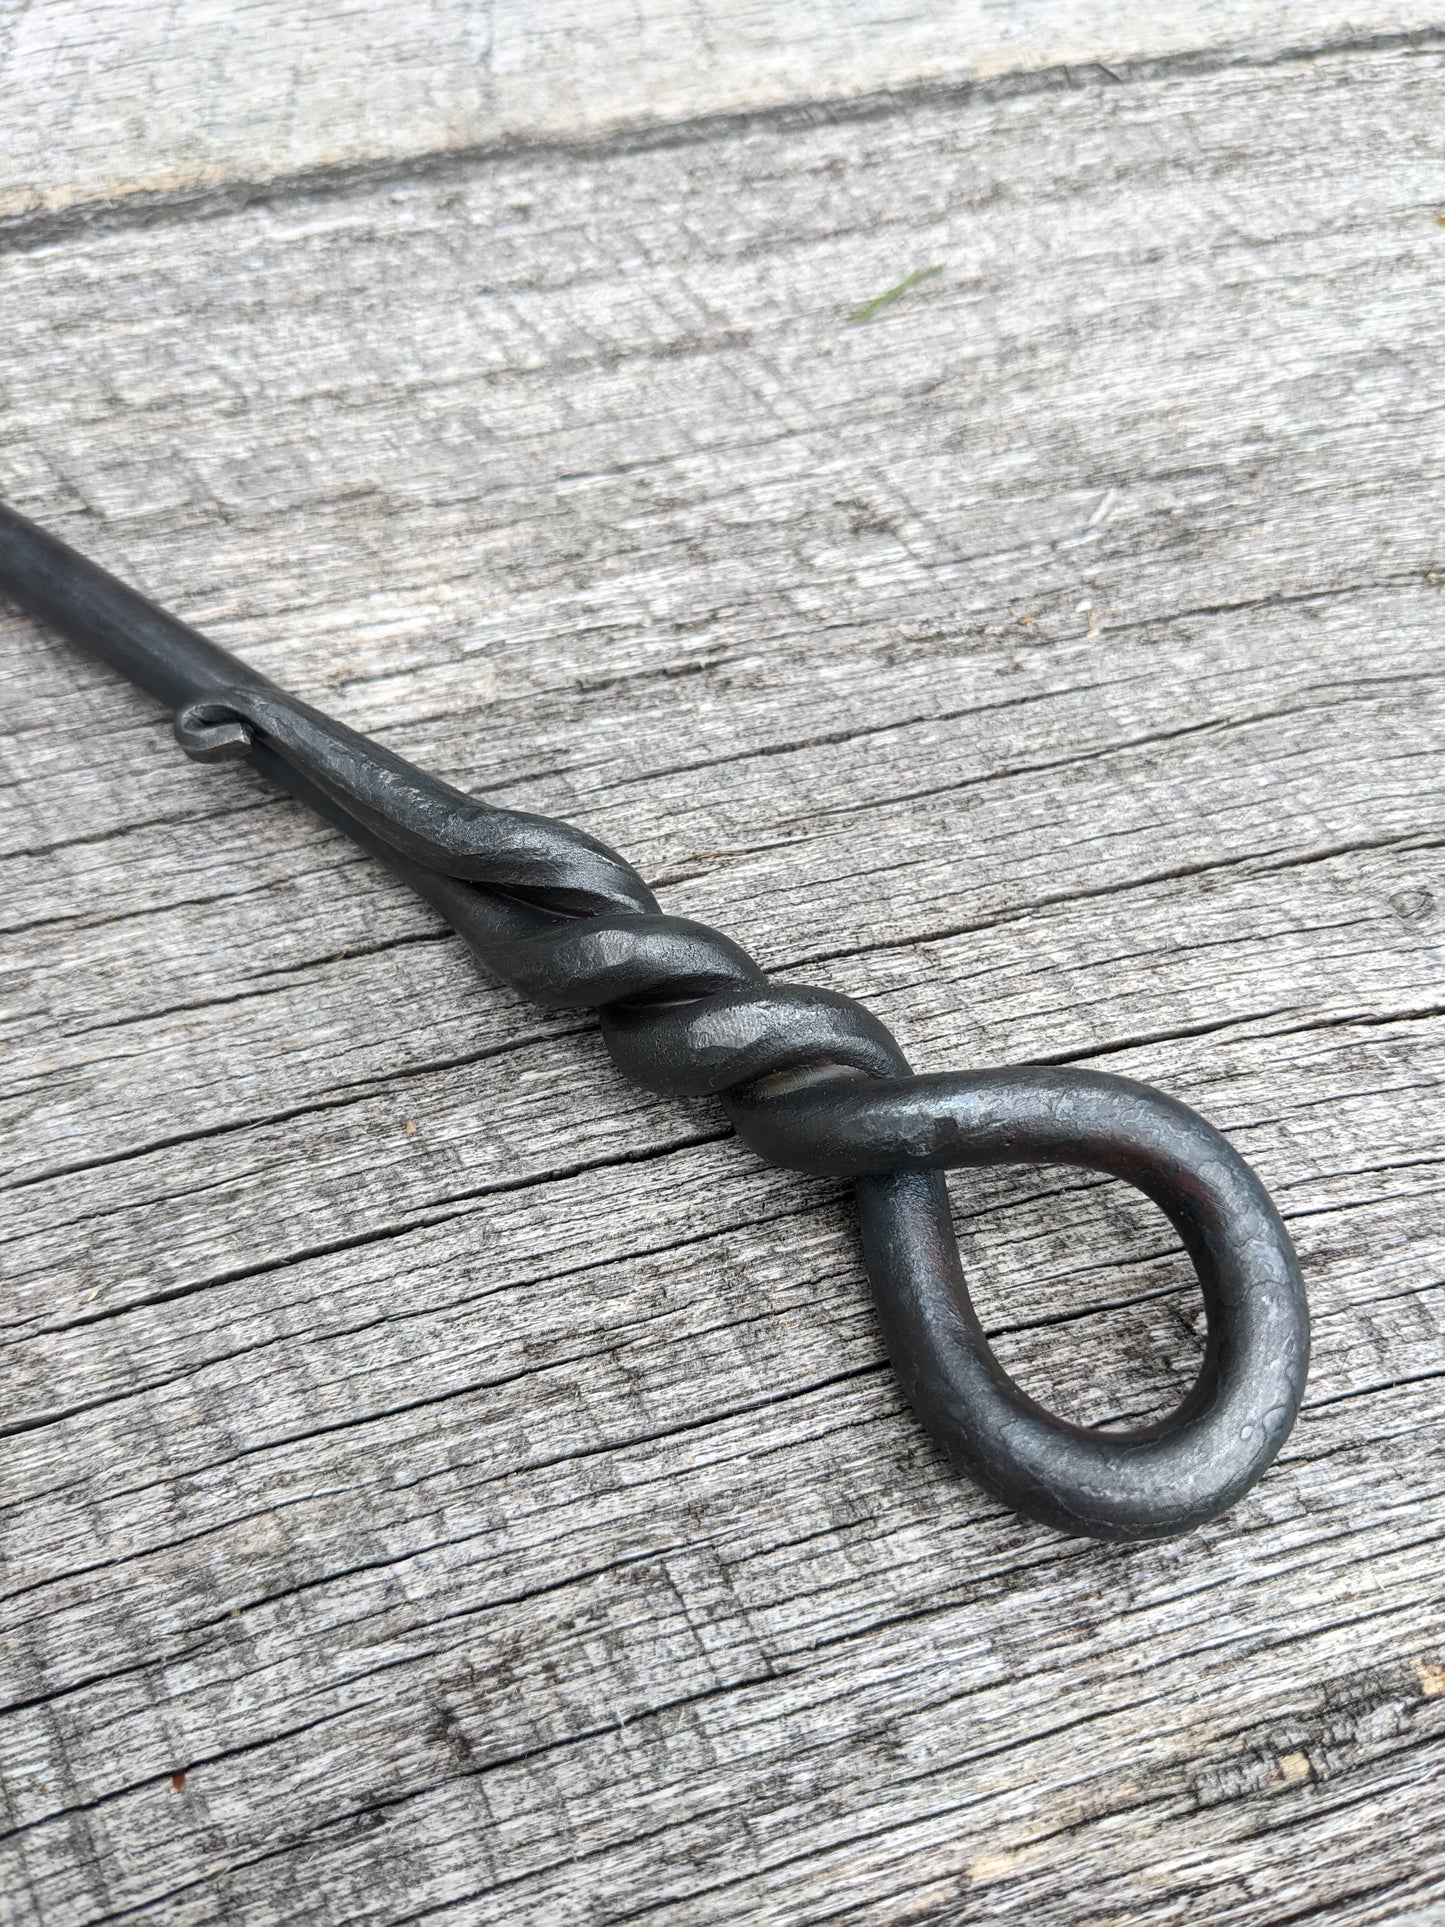 Handle end of the hand forged steak turner.  The metal is wrapped back up upon itself, making a loop that can be used to hang when not in use. 